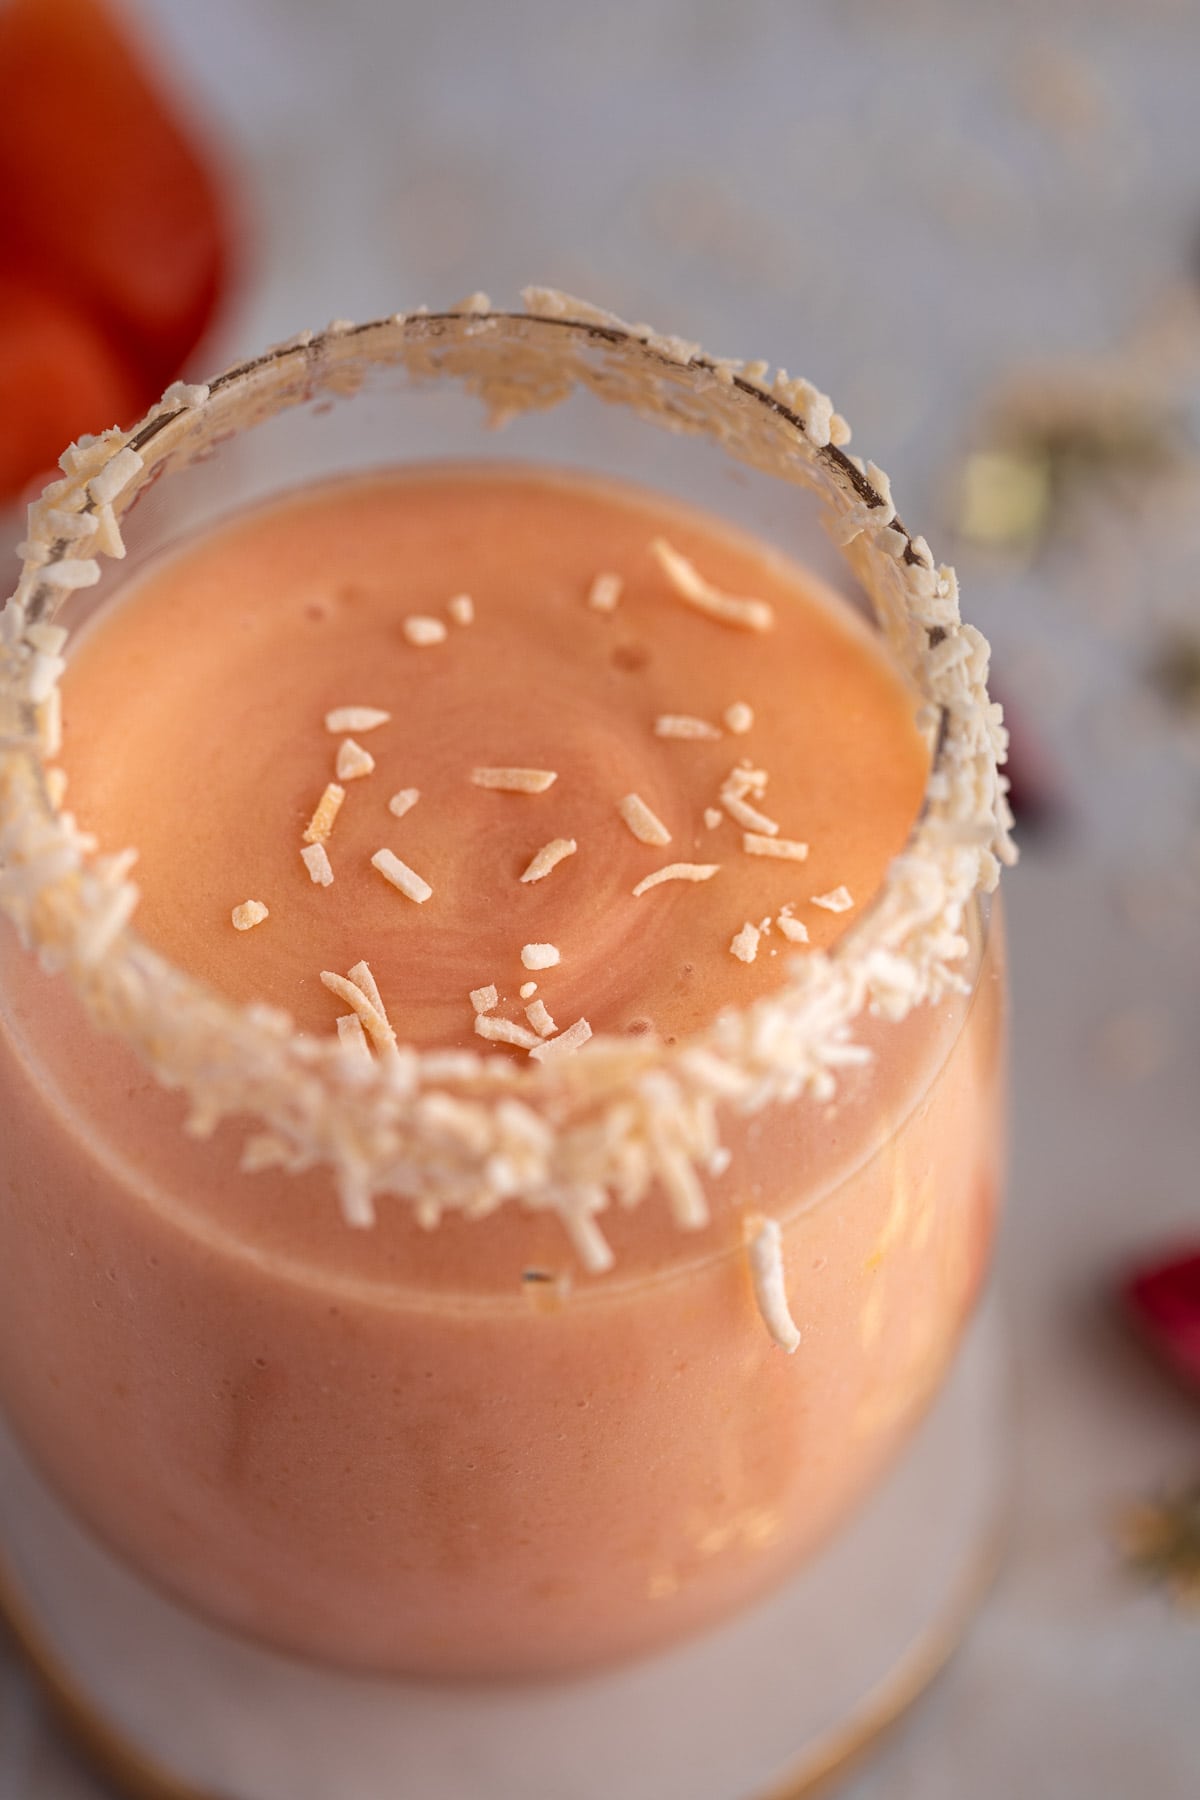 Up close view of the smoothie topped with shredded coconut, sitting on a white marble coaster.